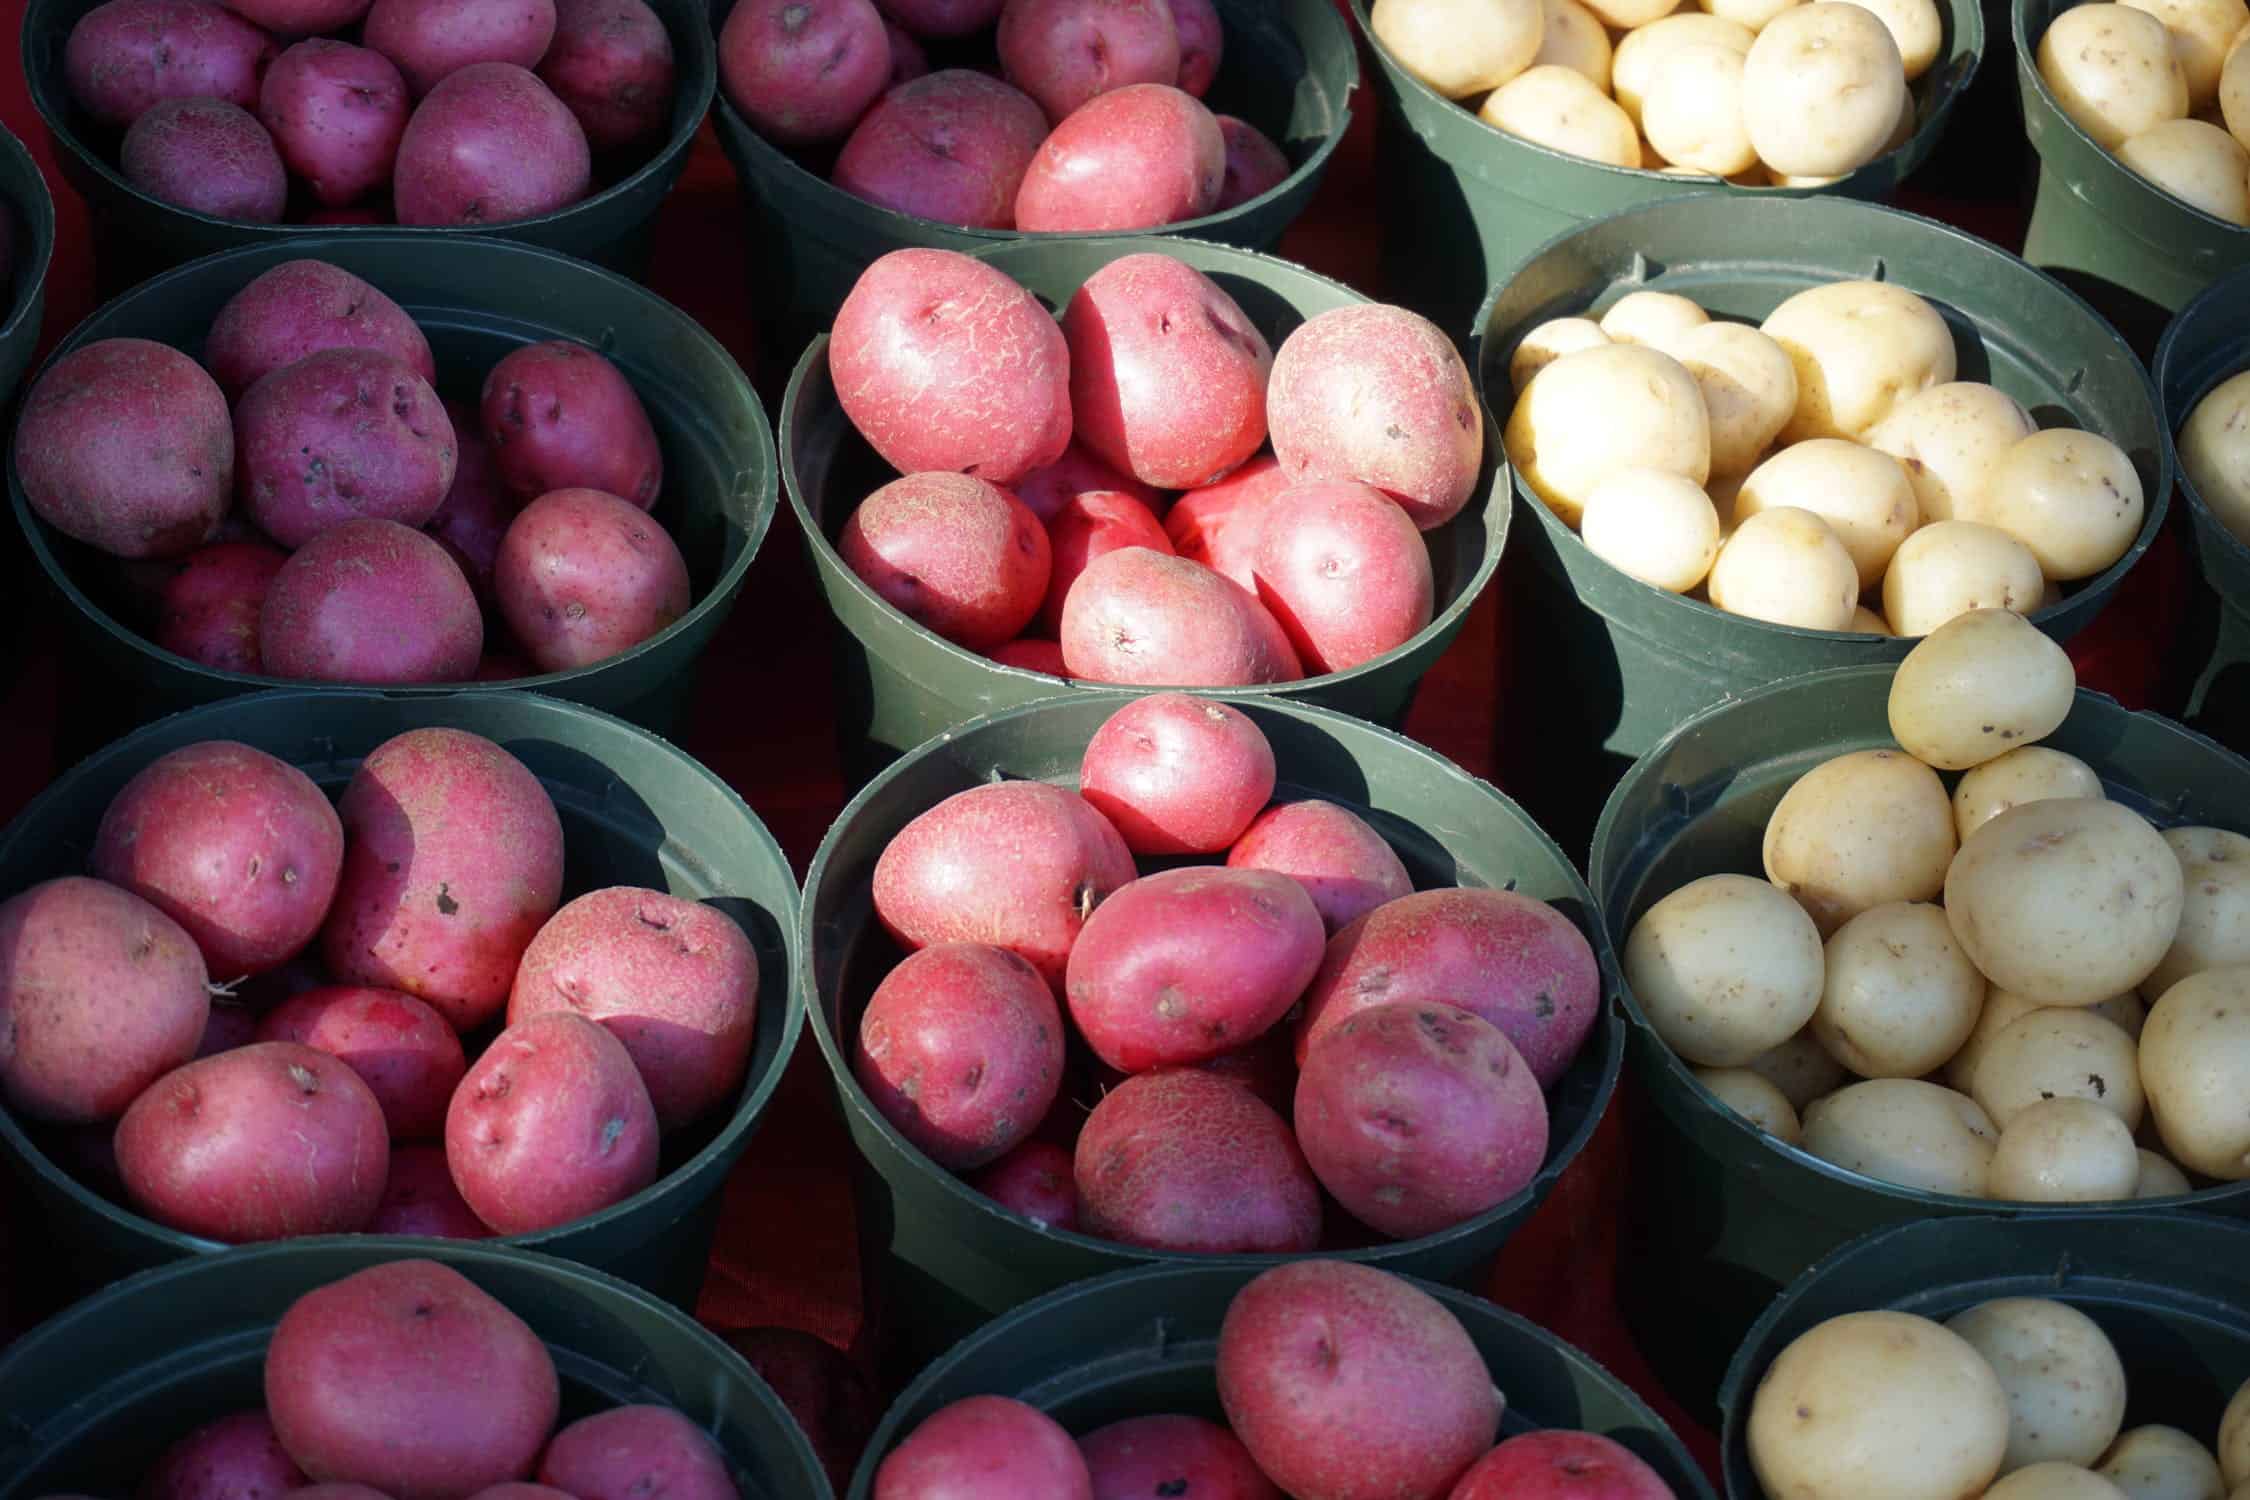 The depressing reason why some food banks are turning away potatoes and root vegetables